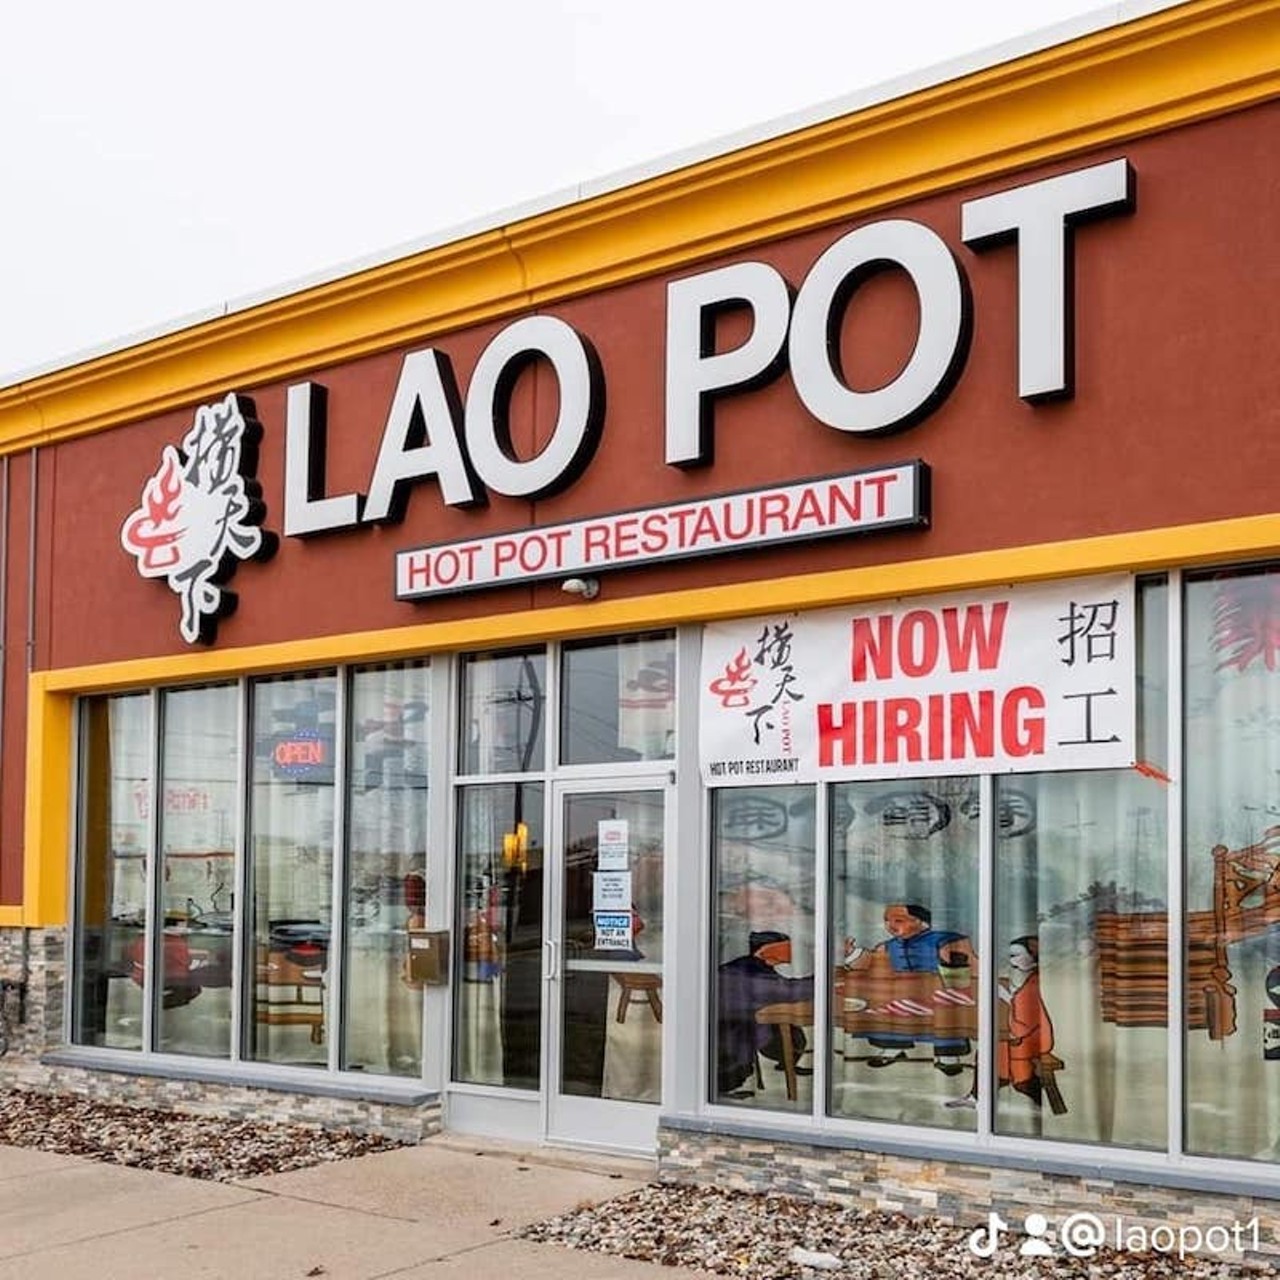 Lao Pot
32707 John R Rd., Madison Heights; 248-689-9888; thekungfunoodlehouse.com
Opened in 2020, Lao Pot offers a selection of greatest hits from China’s regional styles, with a variety of broths at varying levels of spice levels.